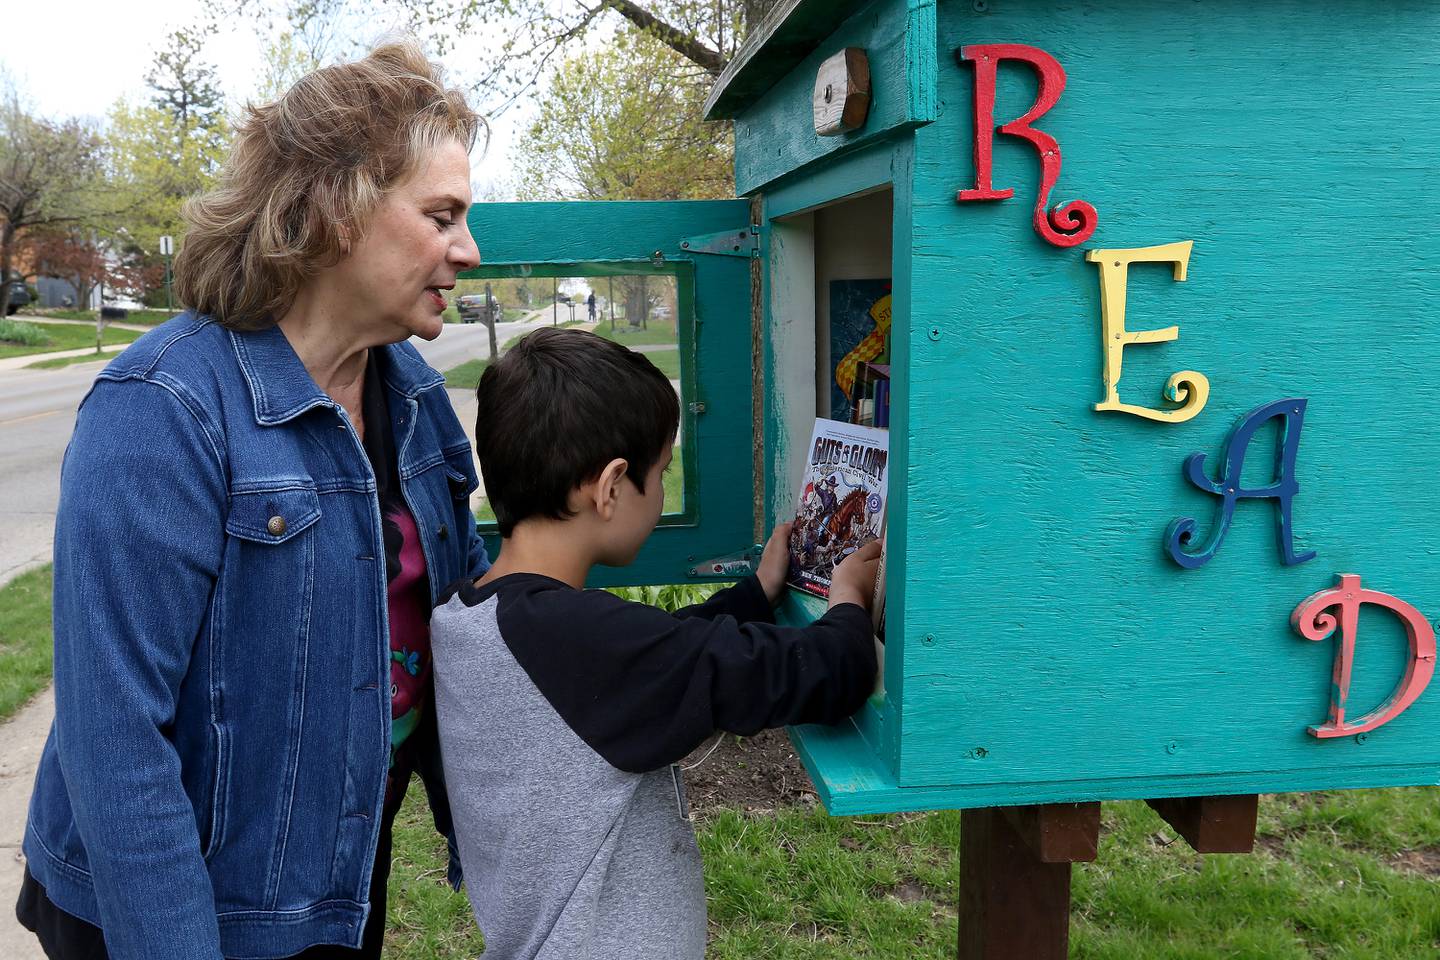 Chris Chirchirillo and Jaxen Esparza, 8, pick out a new book to read from the little free library at the end of her block on Saturday, April 24, 2021 in Lake in the Hills. Chirchirillo is one of 24 people to receive an outpatient robotic lung surgery at Northwestern Medicine and, four months later, is enjoying returning to normal activities.